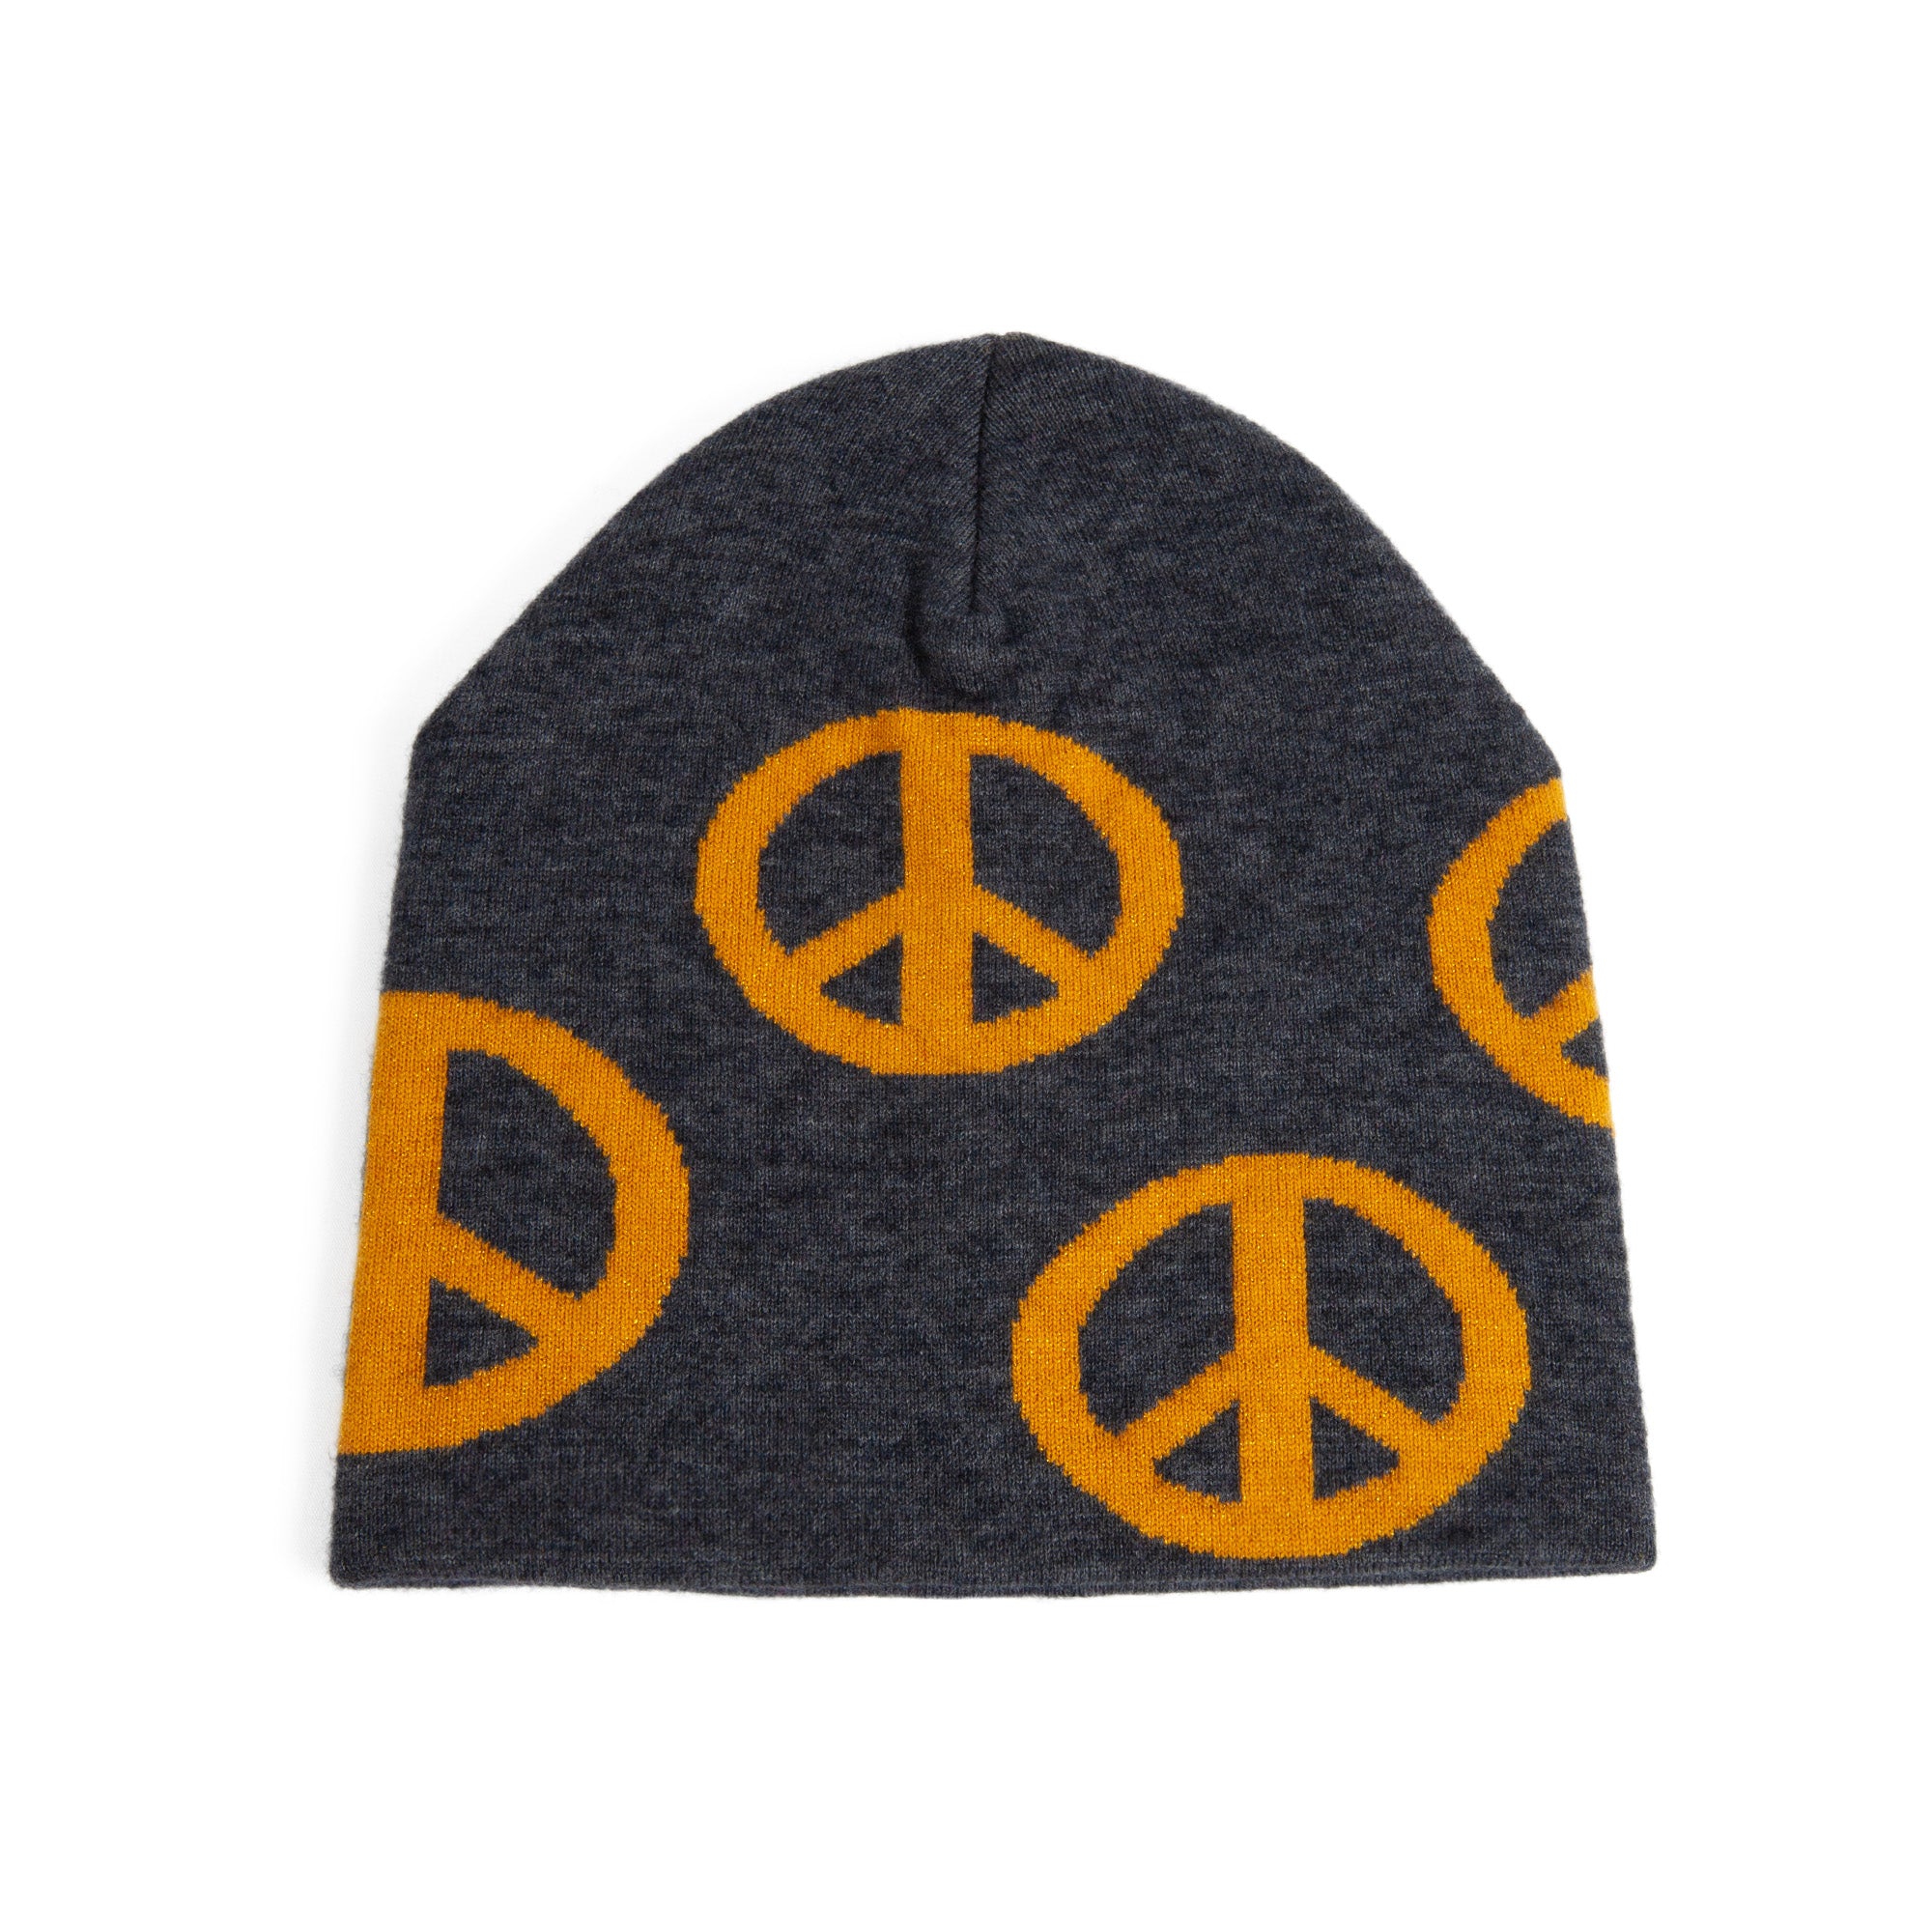 Women’s Hats, Women’s Beanie Hats, Winter Hats,  Comfortable, Peace Lady, Winter, Cold Weather